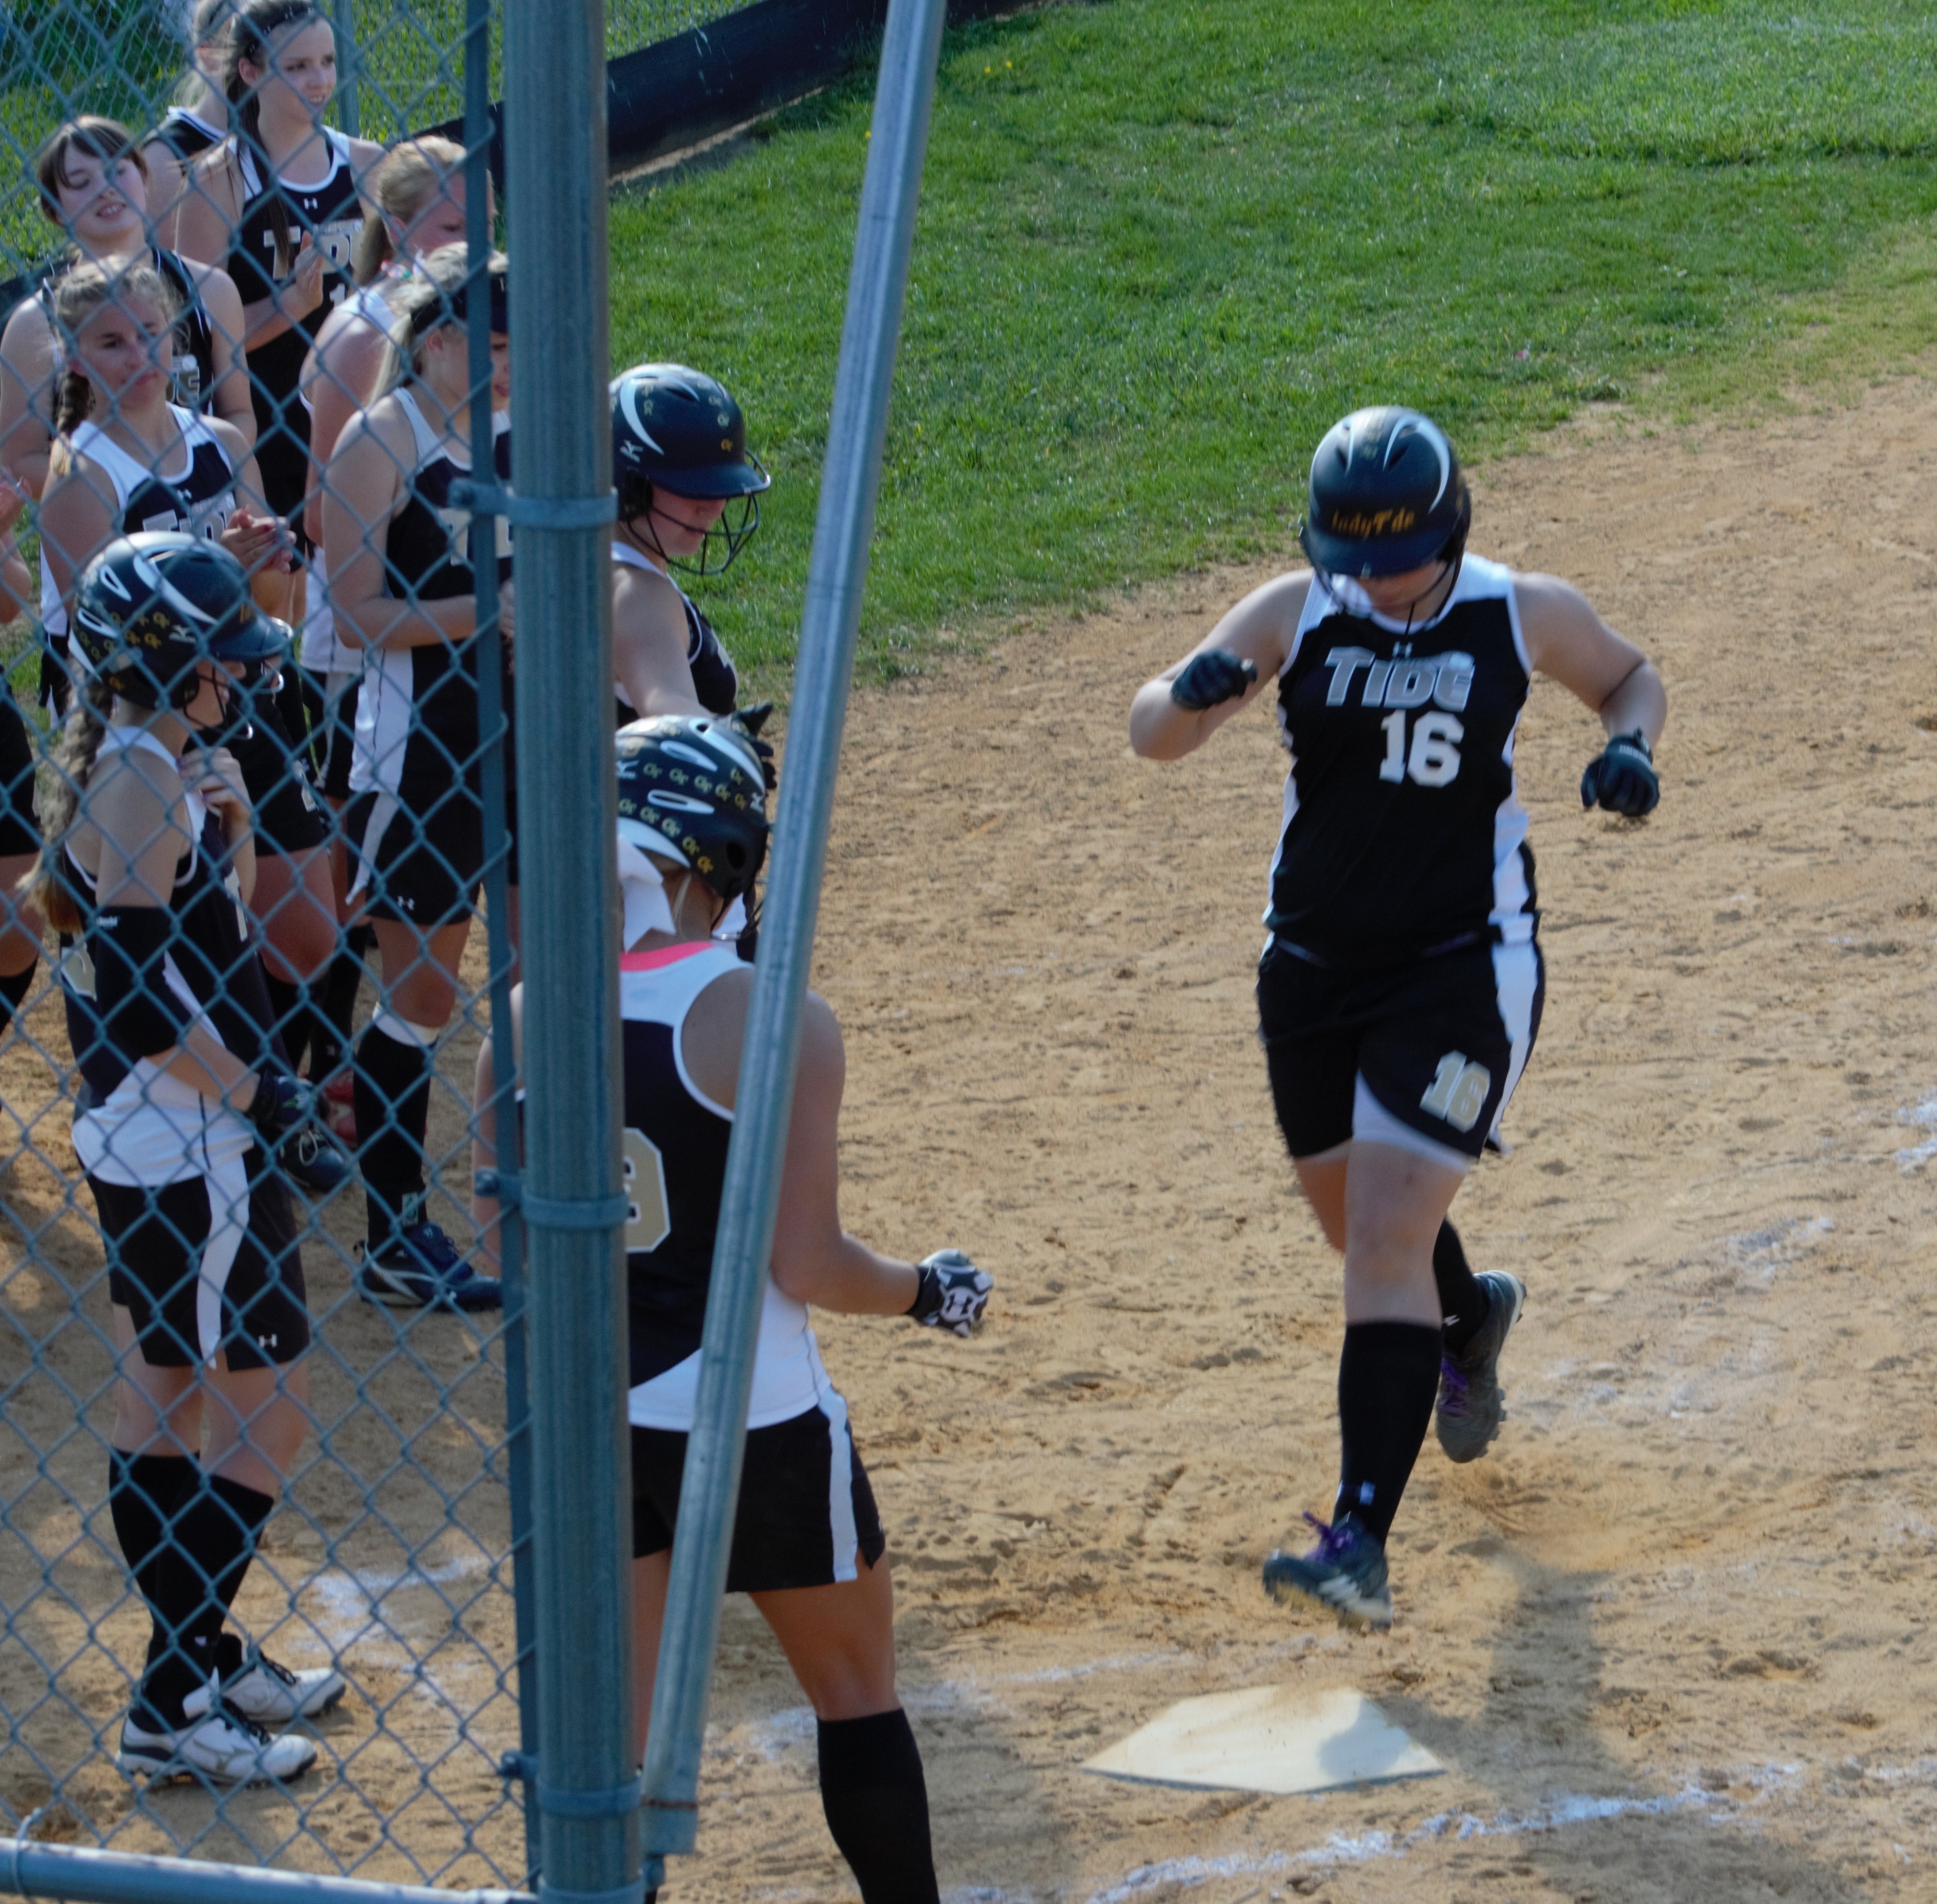 COMING HOME - Curwensville senior Tifany Carter gets a warm reception at home after a three-run homer in the sixth inning.  Curwensville defeated Moshannon Valley 11-2 to Claim the 2013 MVL Title (photo by Rusty McCracken)